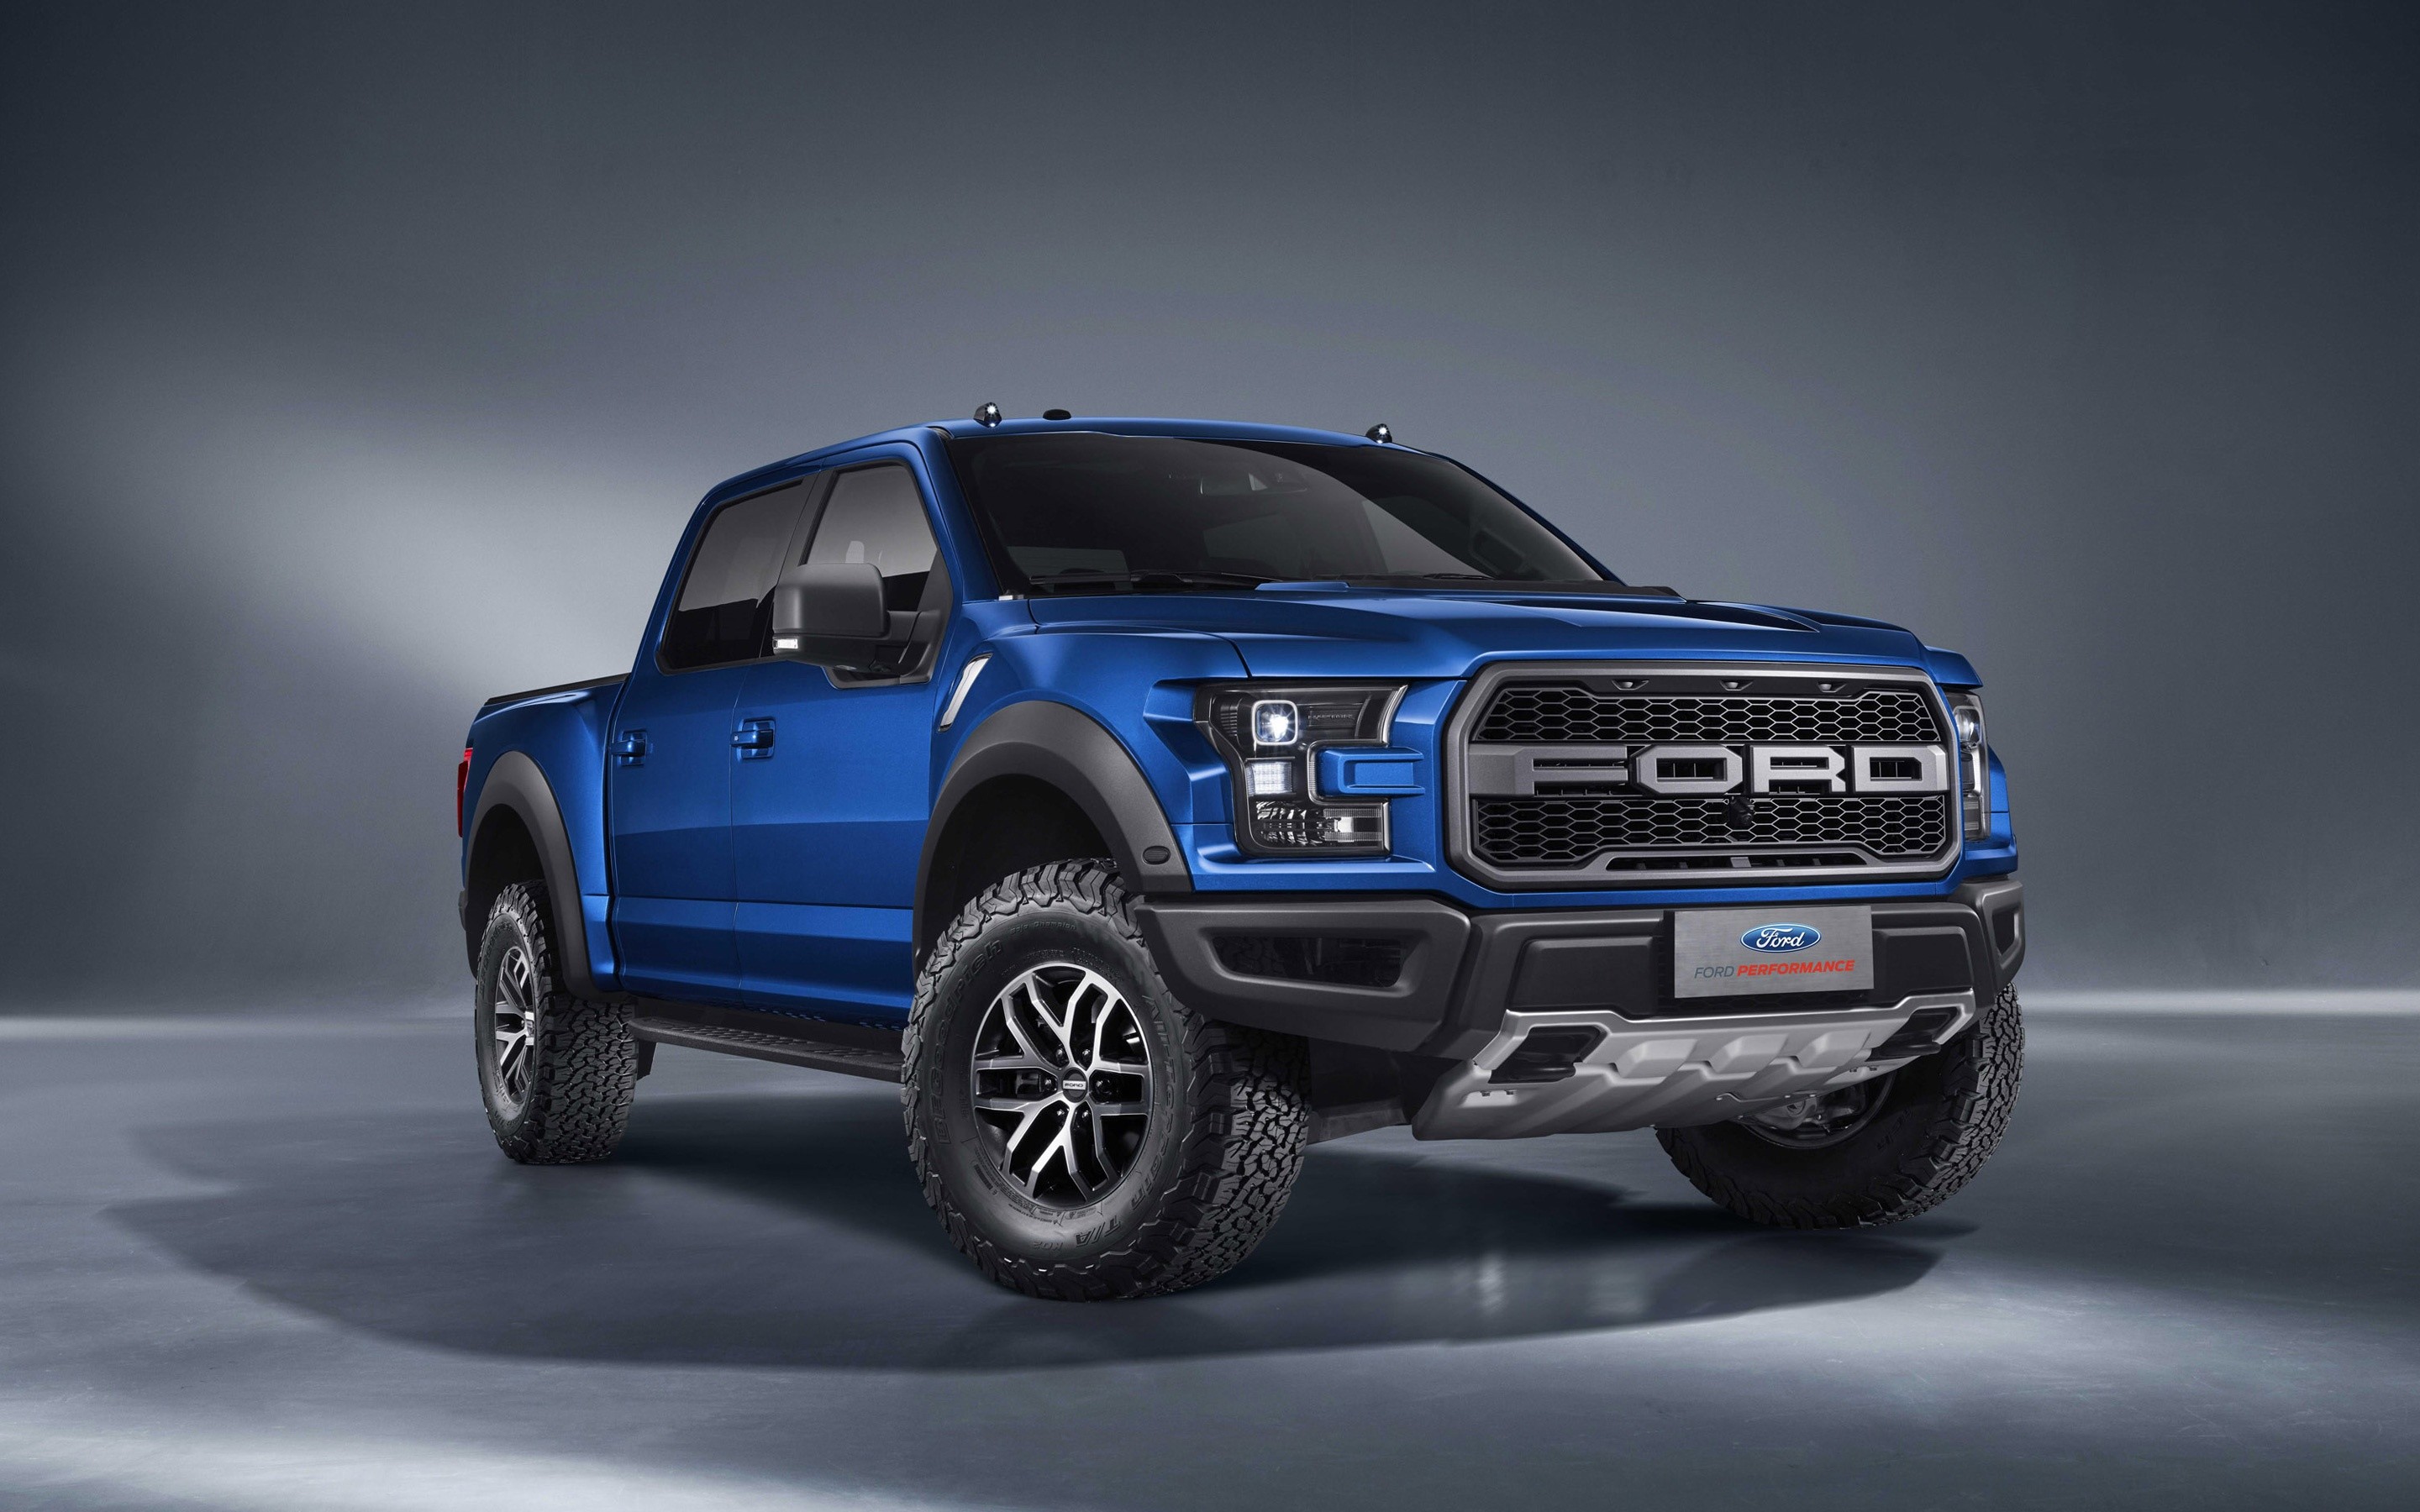 2880x1800 2017 Ford F 150 Raptor Supercrew Wallpapers